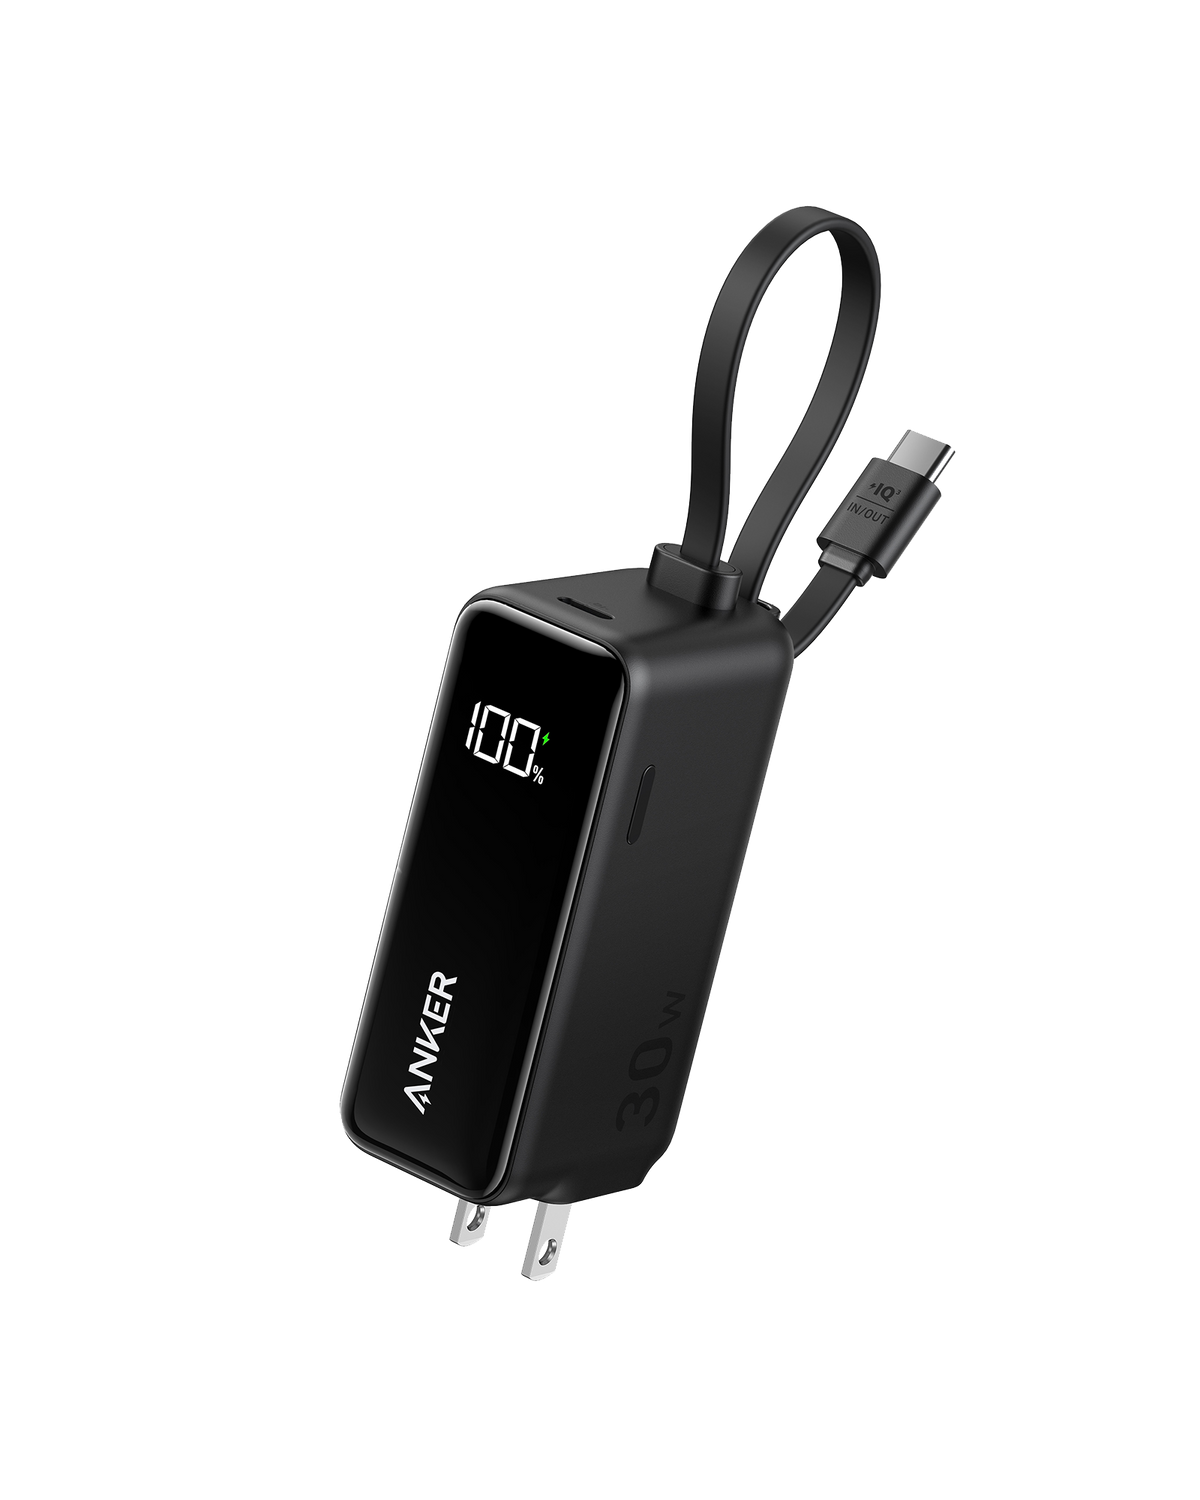 Anker 3-in-1 Power Bank (30W, Fusion, Built-In USB-C Cable)